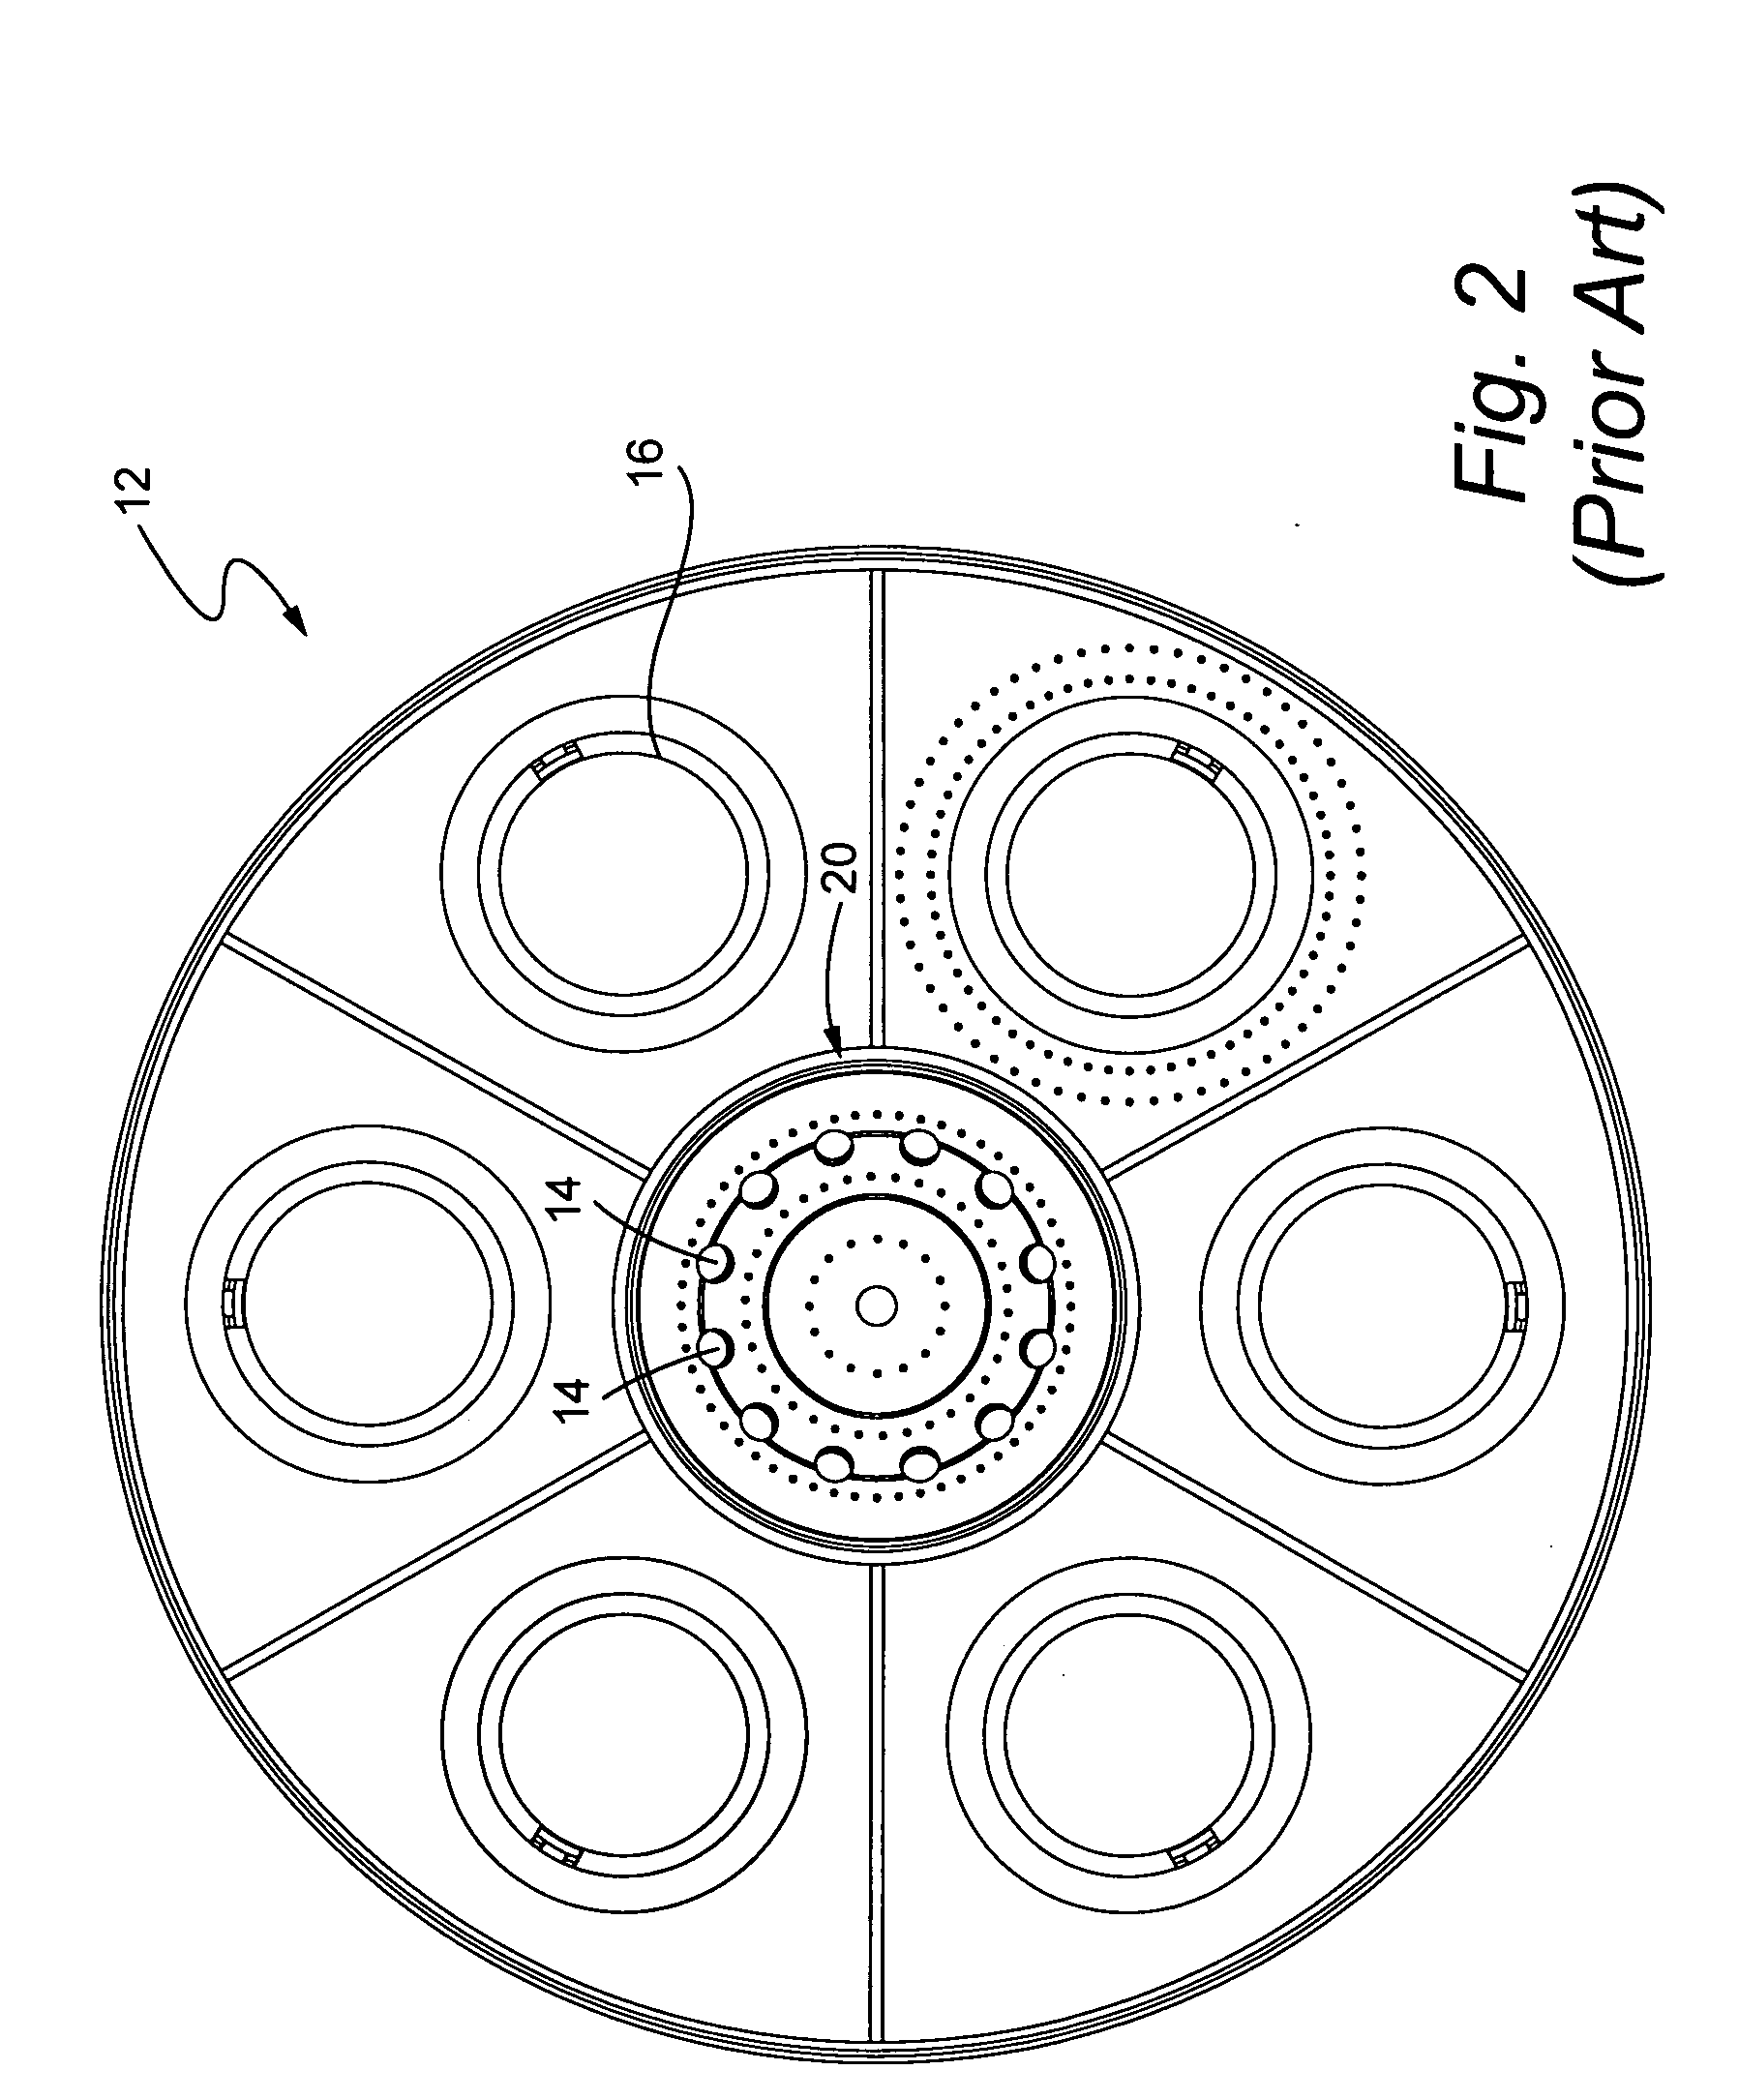 Combustion cap with crown mixing holes